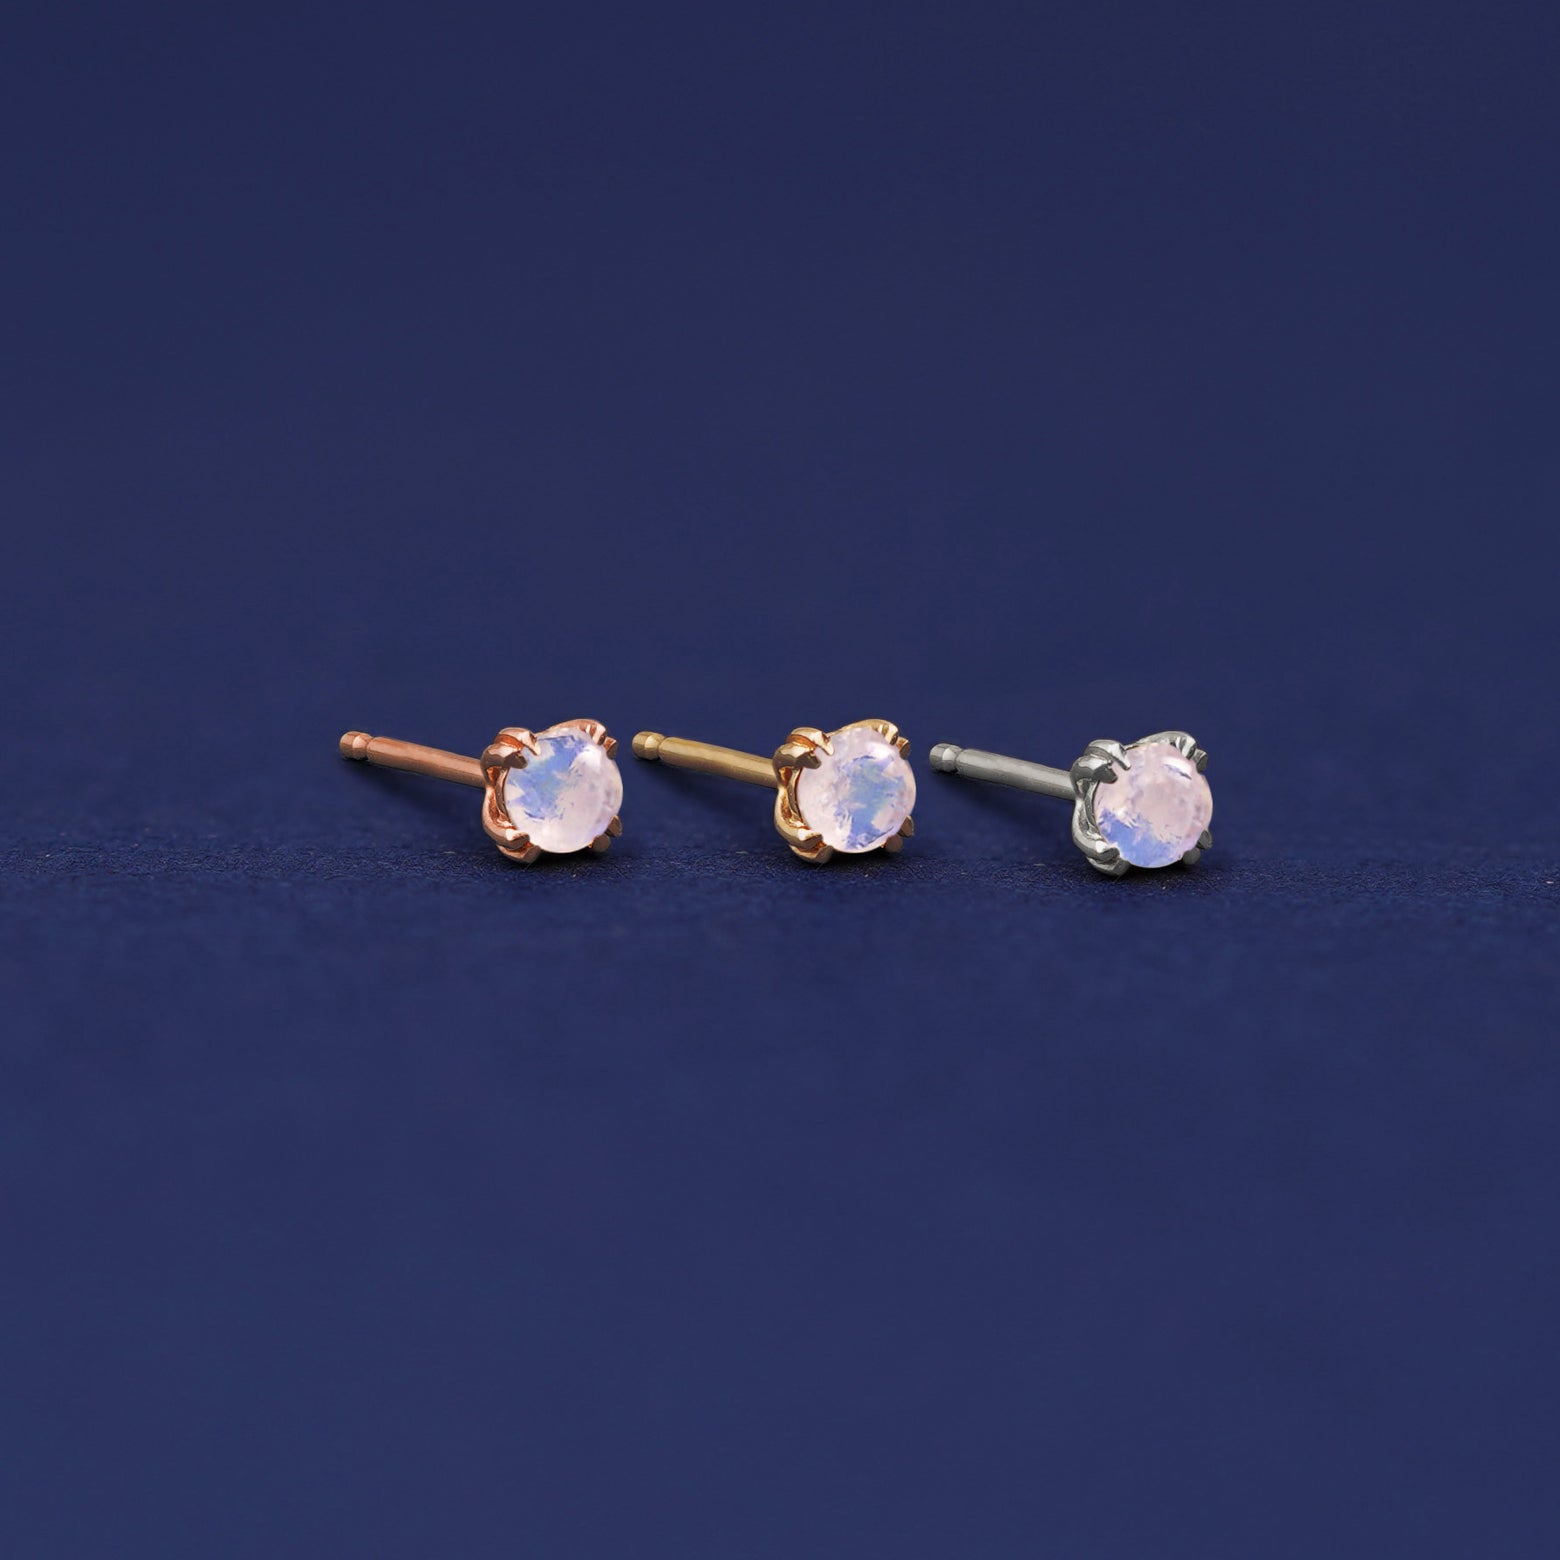 Three versions of the Moonstone Earring shown in options of rose, yellow, and white gold